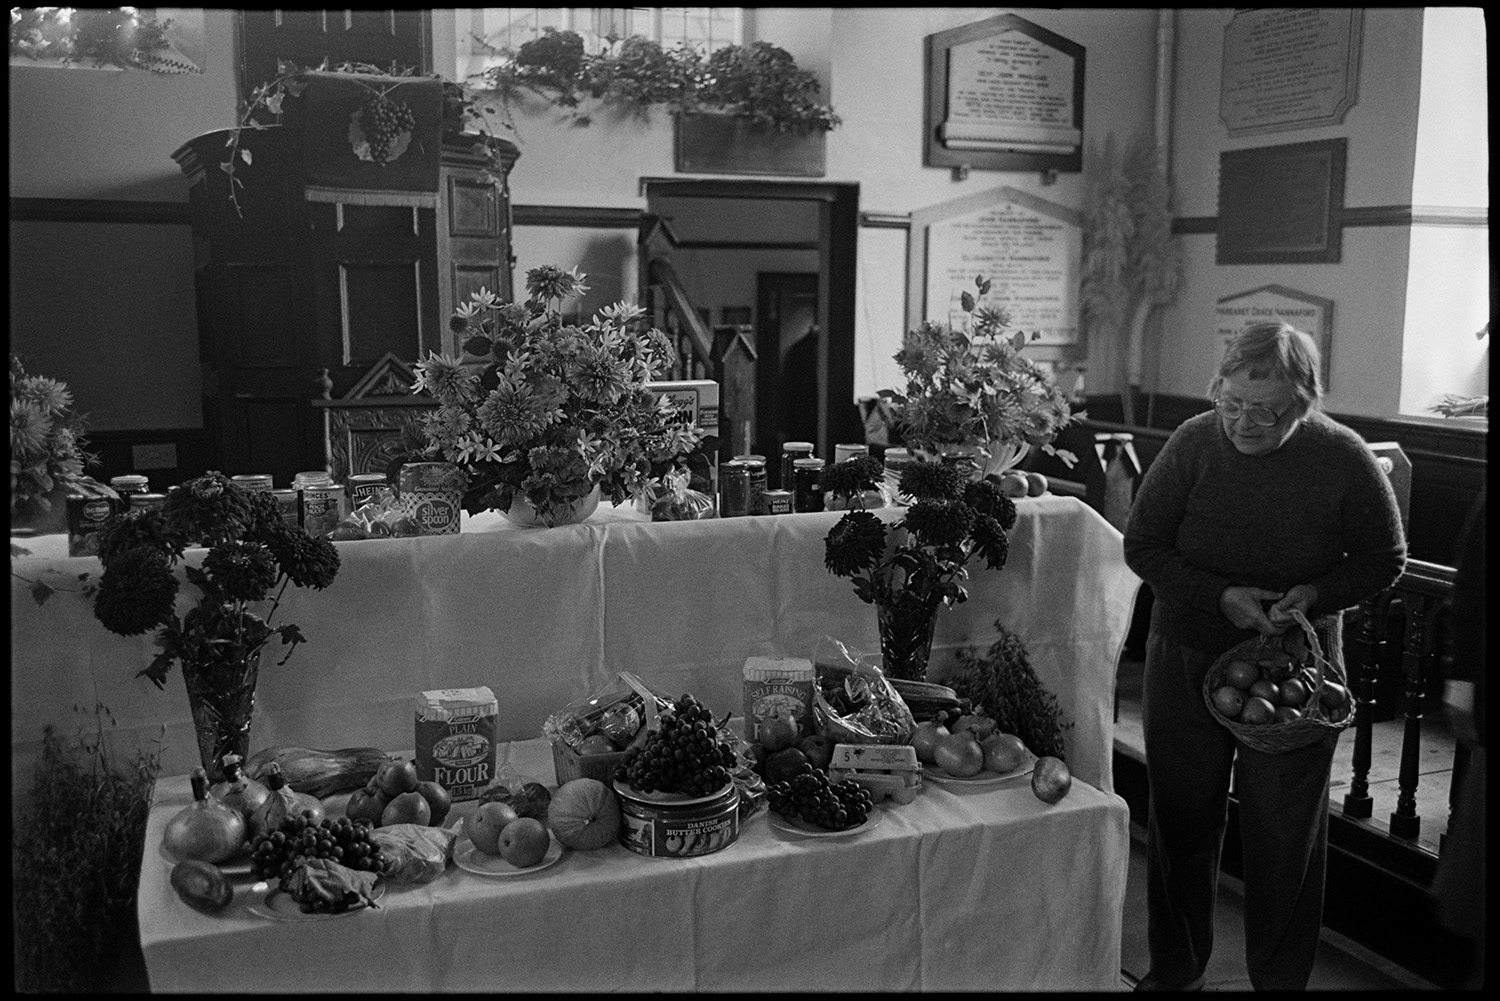 Congregational chapel interior with people decorating for Harvest Festival and having tea. 
[A woman carrying a basket of apples to add to a display of produce and flowers for the Harvest Festival at Chulmleigh Congregational Church. The pulpit can be seen behind the display.]